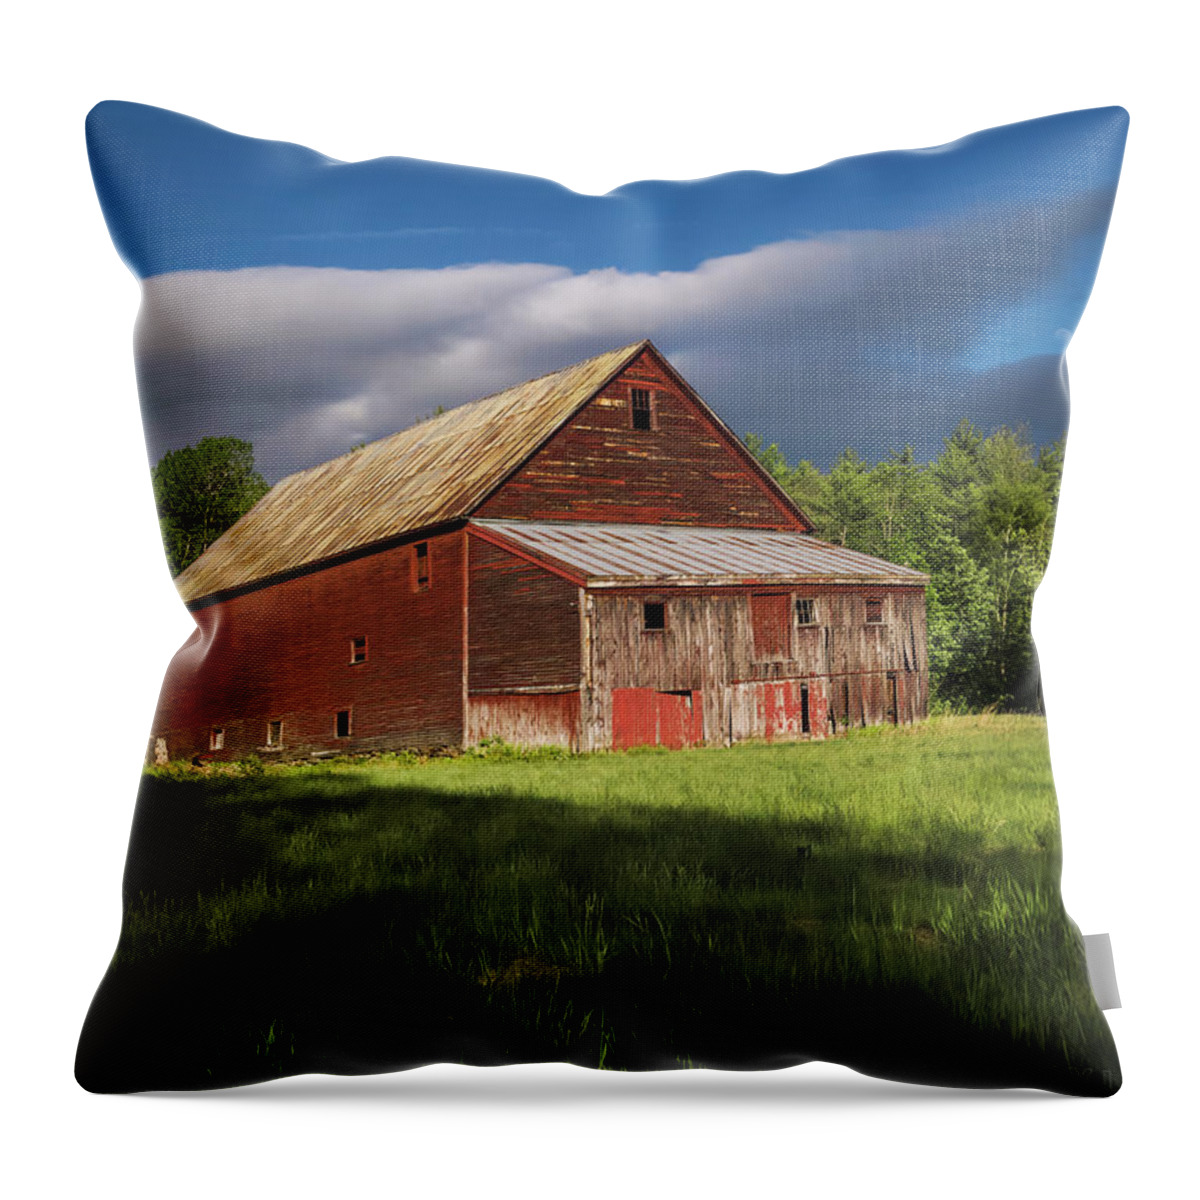 Barn Throw Pillow featuring the photograph Old Red Barn by Jerry LoFaro